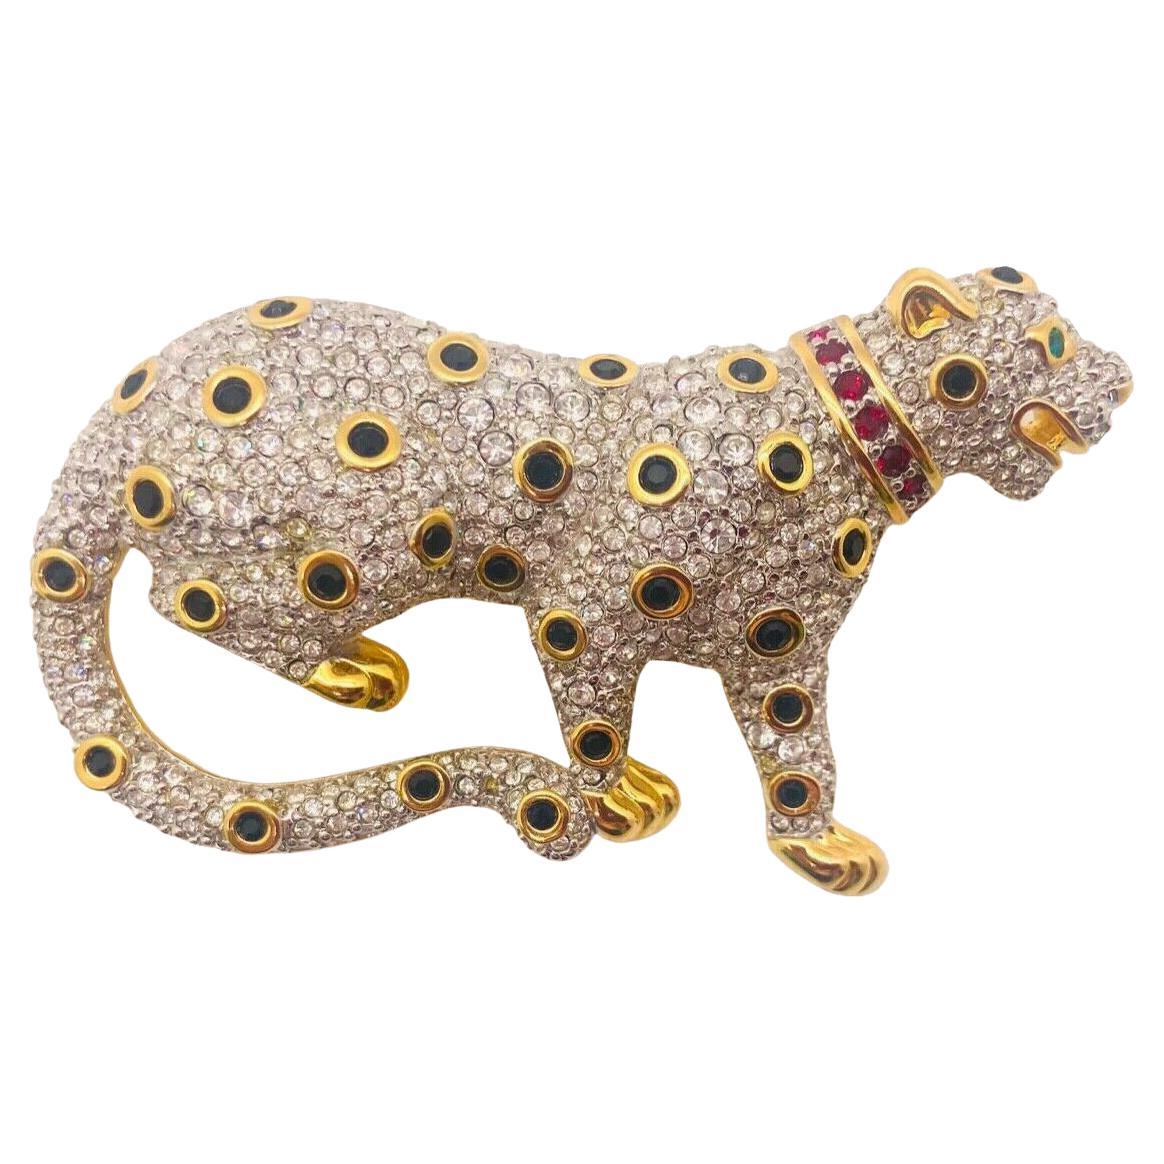 Swarovski Pave' Crystal Gold Leopard Brooch or Pin, Signed and Retired For Sale